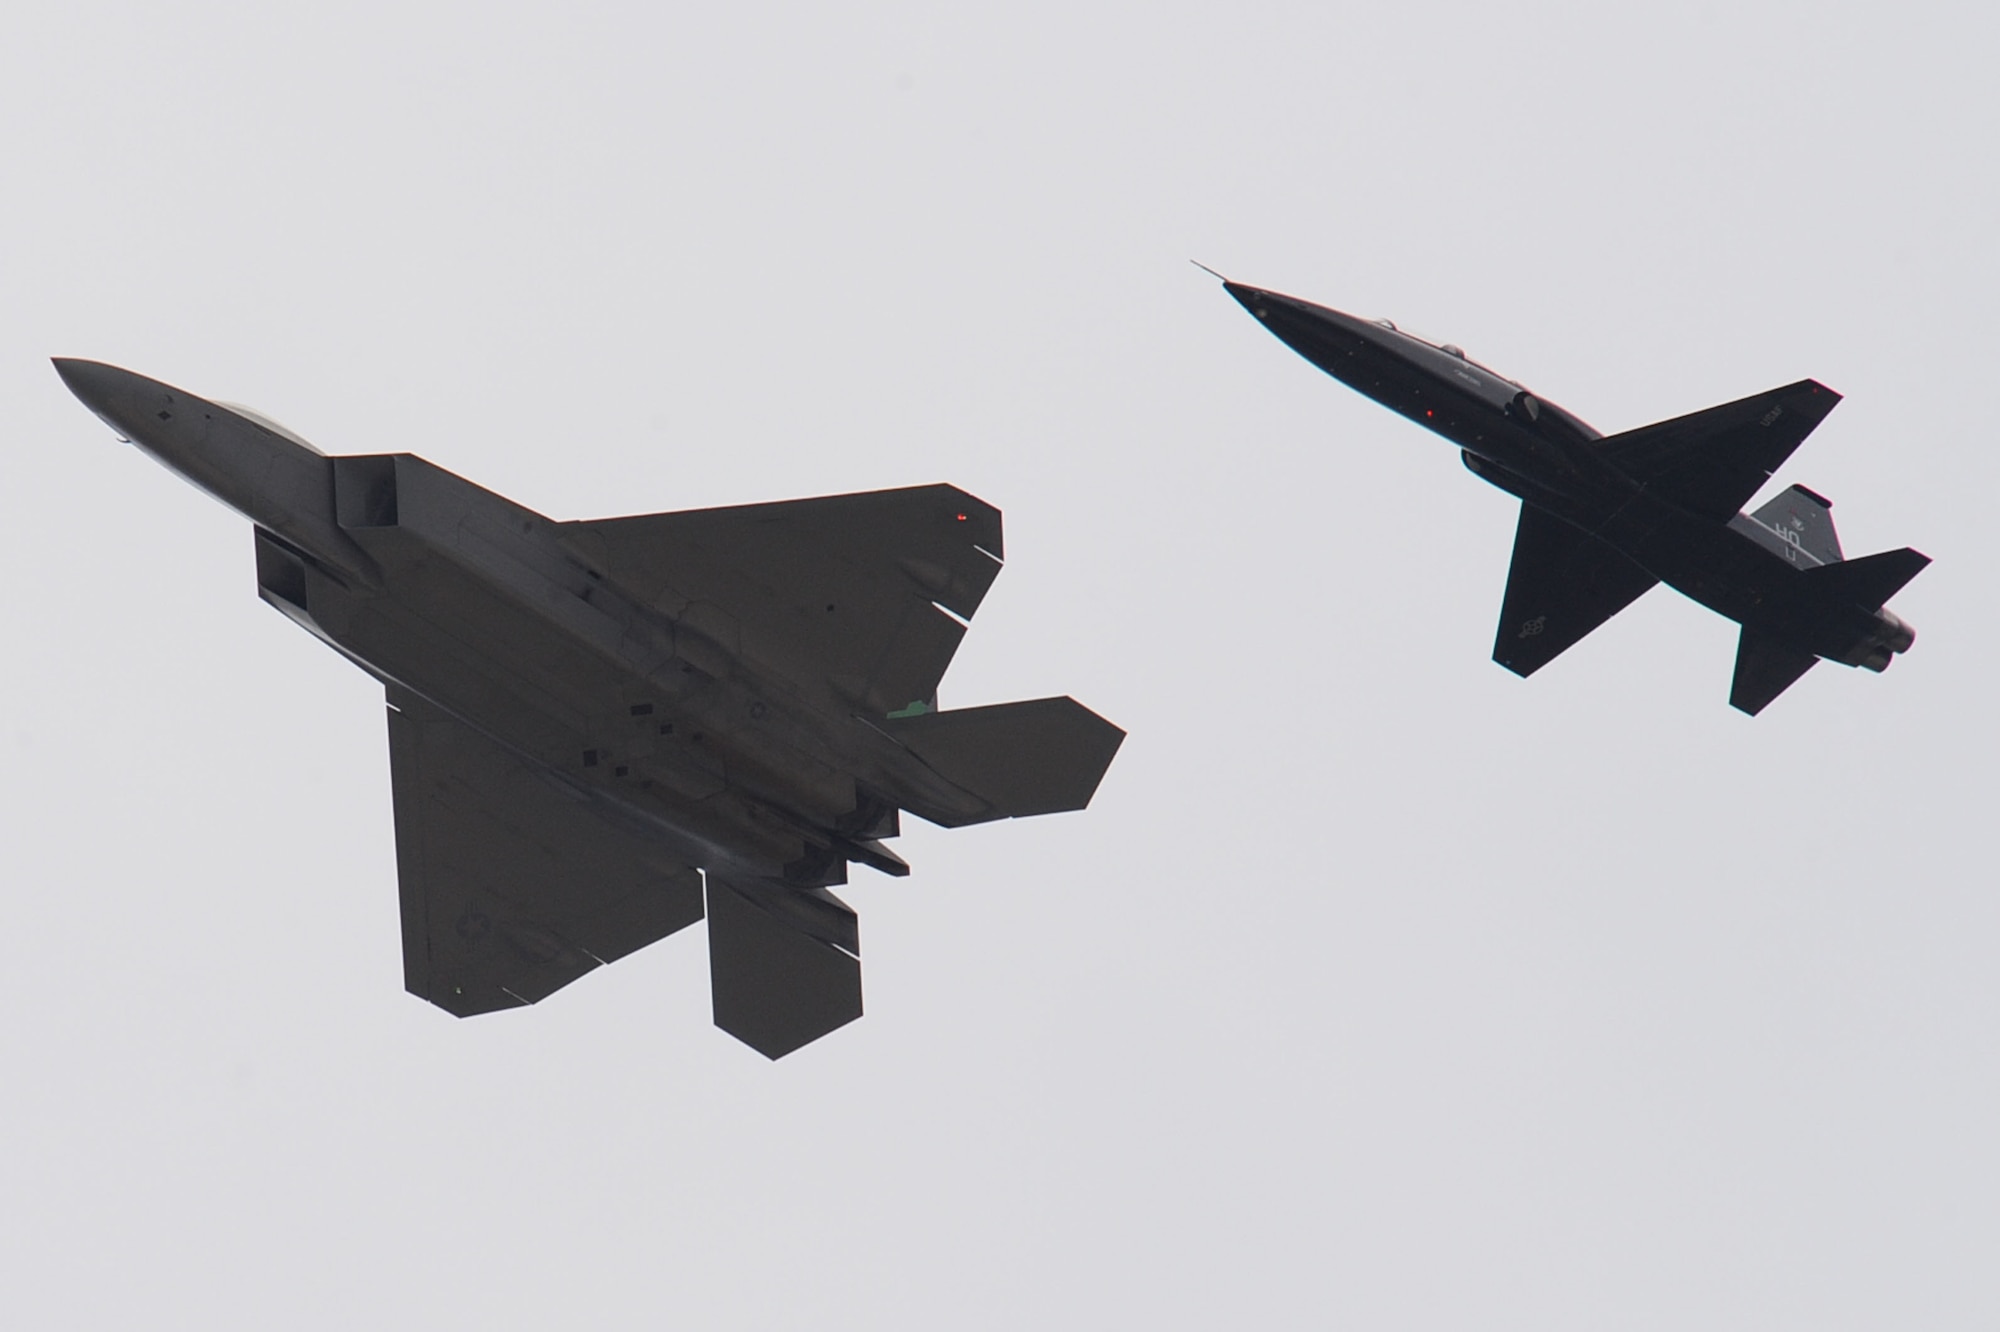 An F-22 Raptor escorts a T-38 Talon onto Langley Air Force Base, Va., April 1, 2011. The T-38 Talon, flown by Col. Kevin Mastin, 1st Fighter Wing vice commander, is on a temporary assignment to support the F-22 Raptors and provide hands-on combat readiness training for 1st FW pilots. (U.S. Air Force photo by Senior Airman Brian Ybarbo/Released)

   